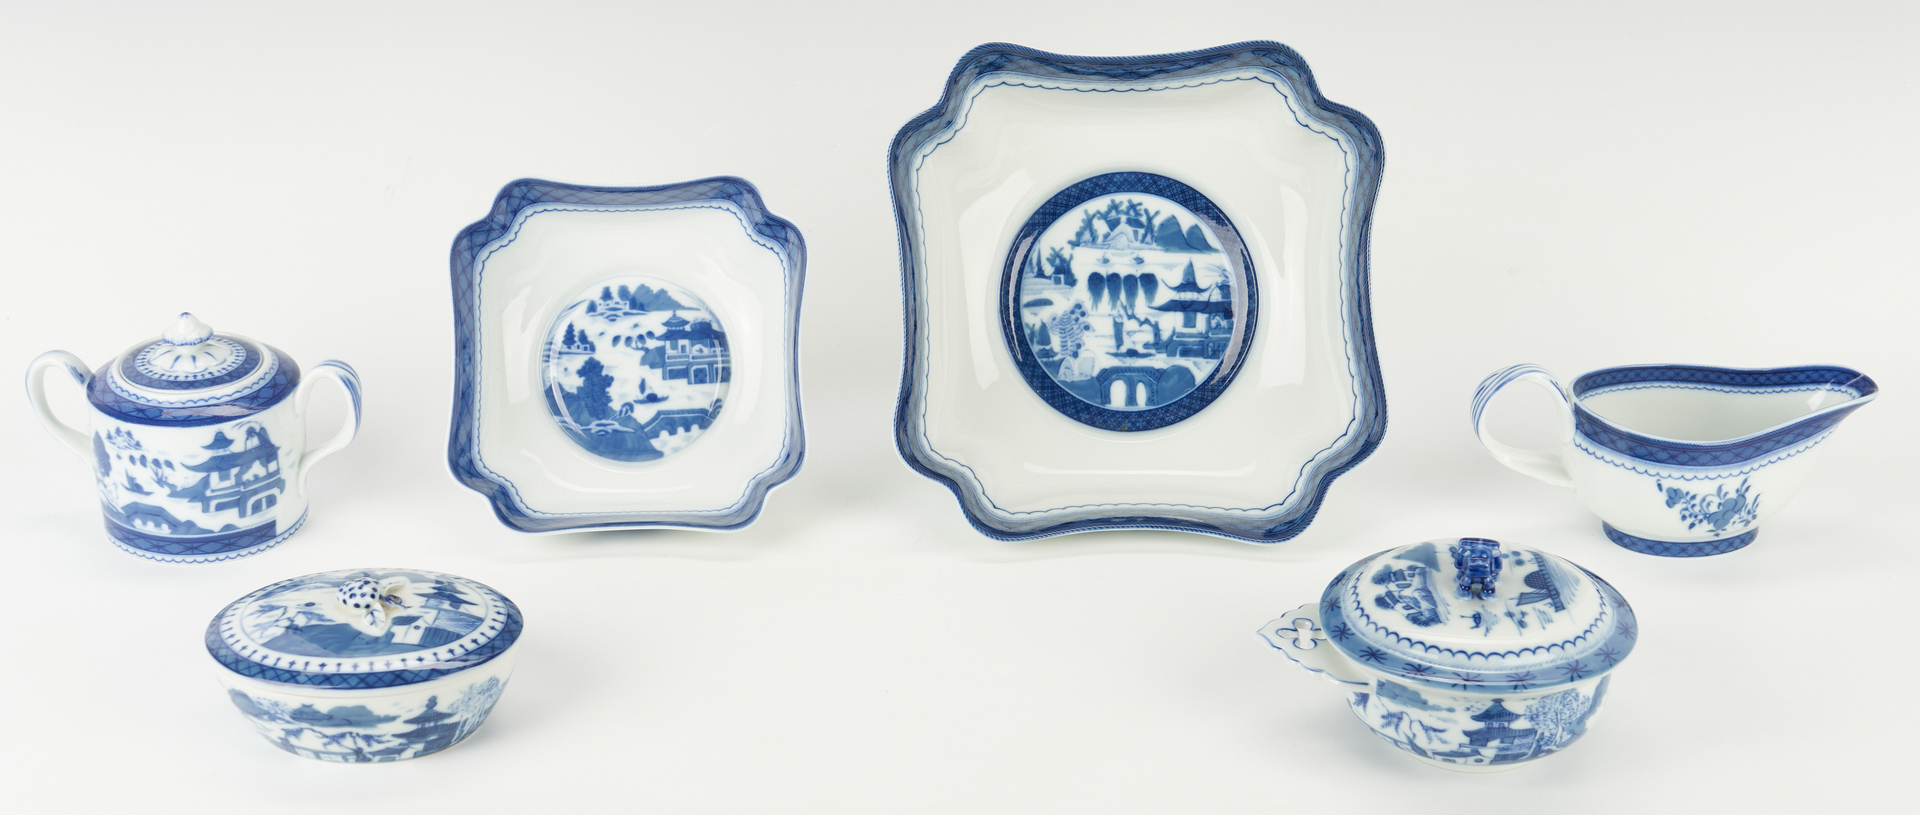 Lot 317: 16 Mottahedeh, Historic Charleston, Canton Serving Pieces